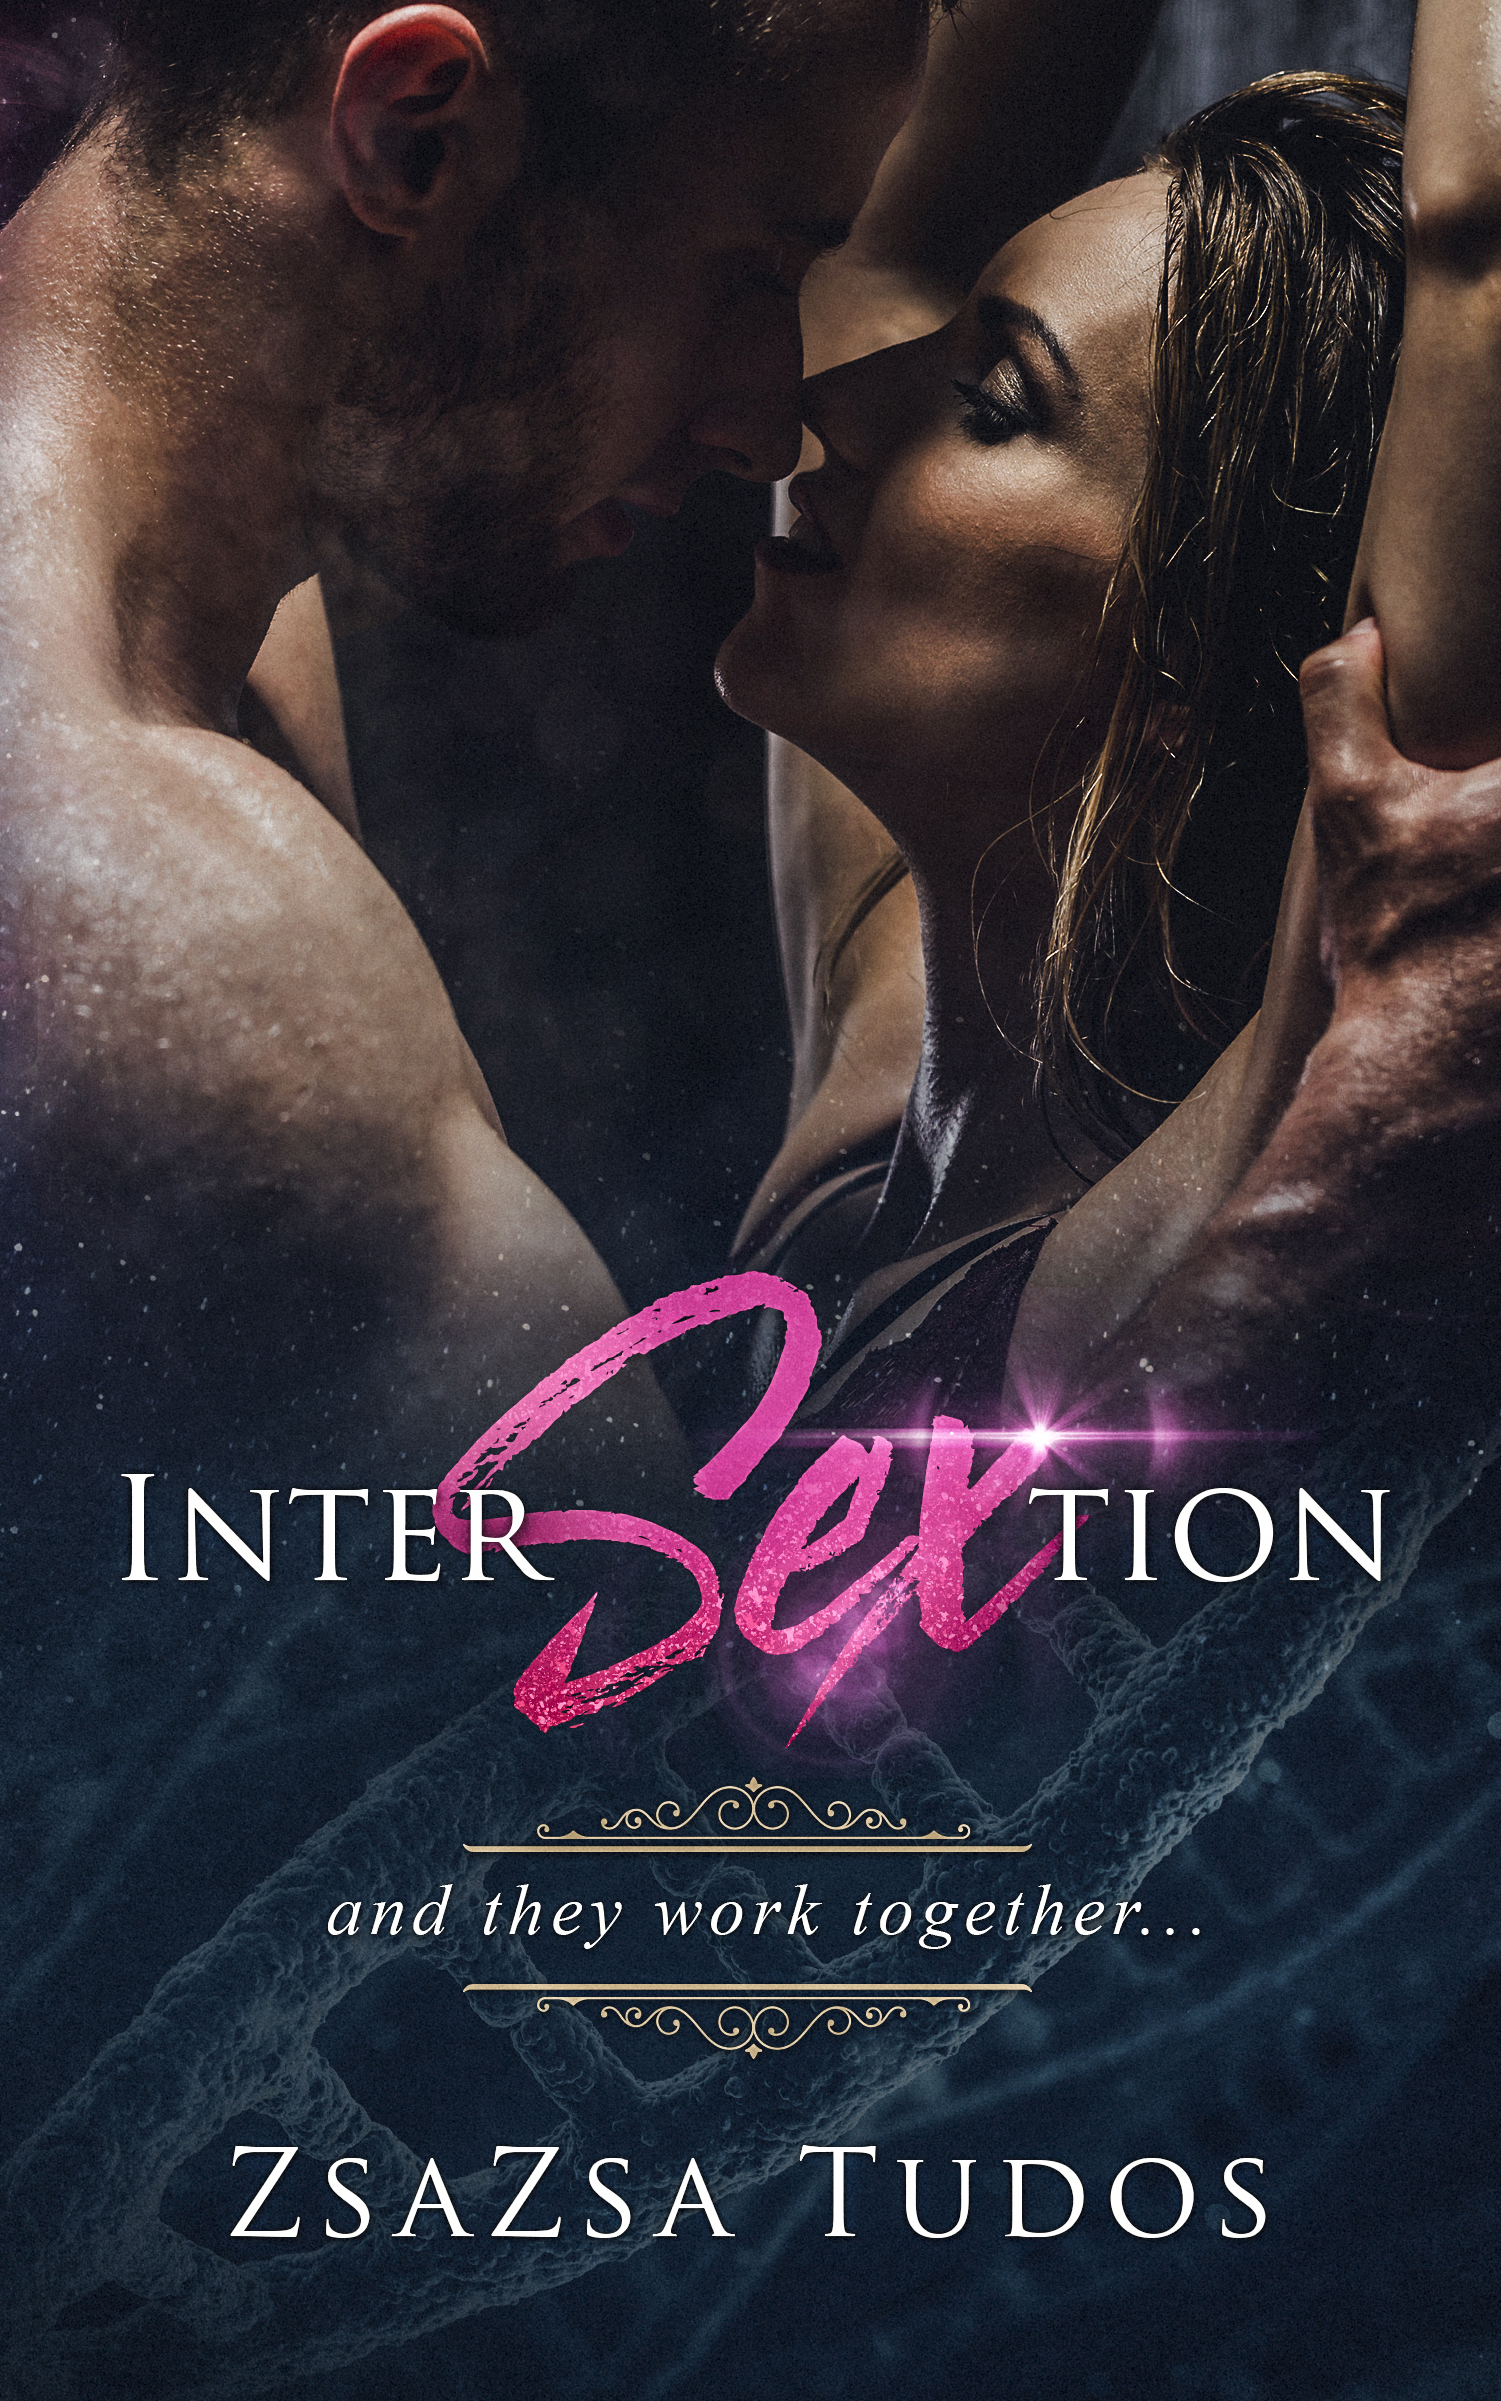 FREE: Intersextion: and they work together by Zsa Zsa Tudos